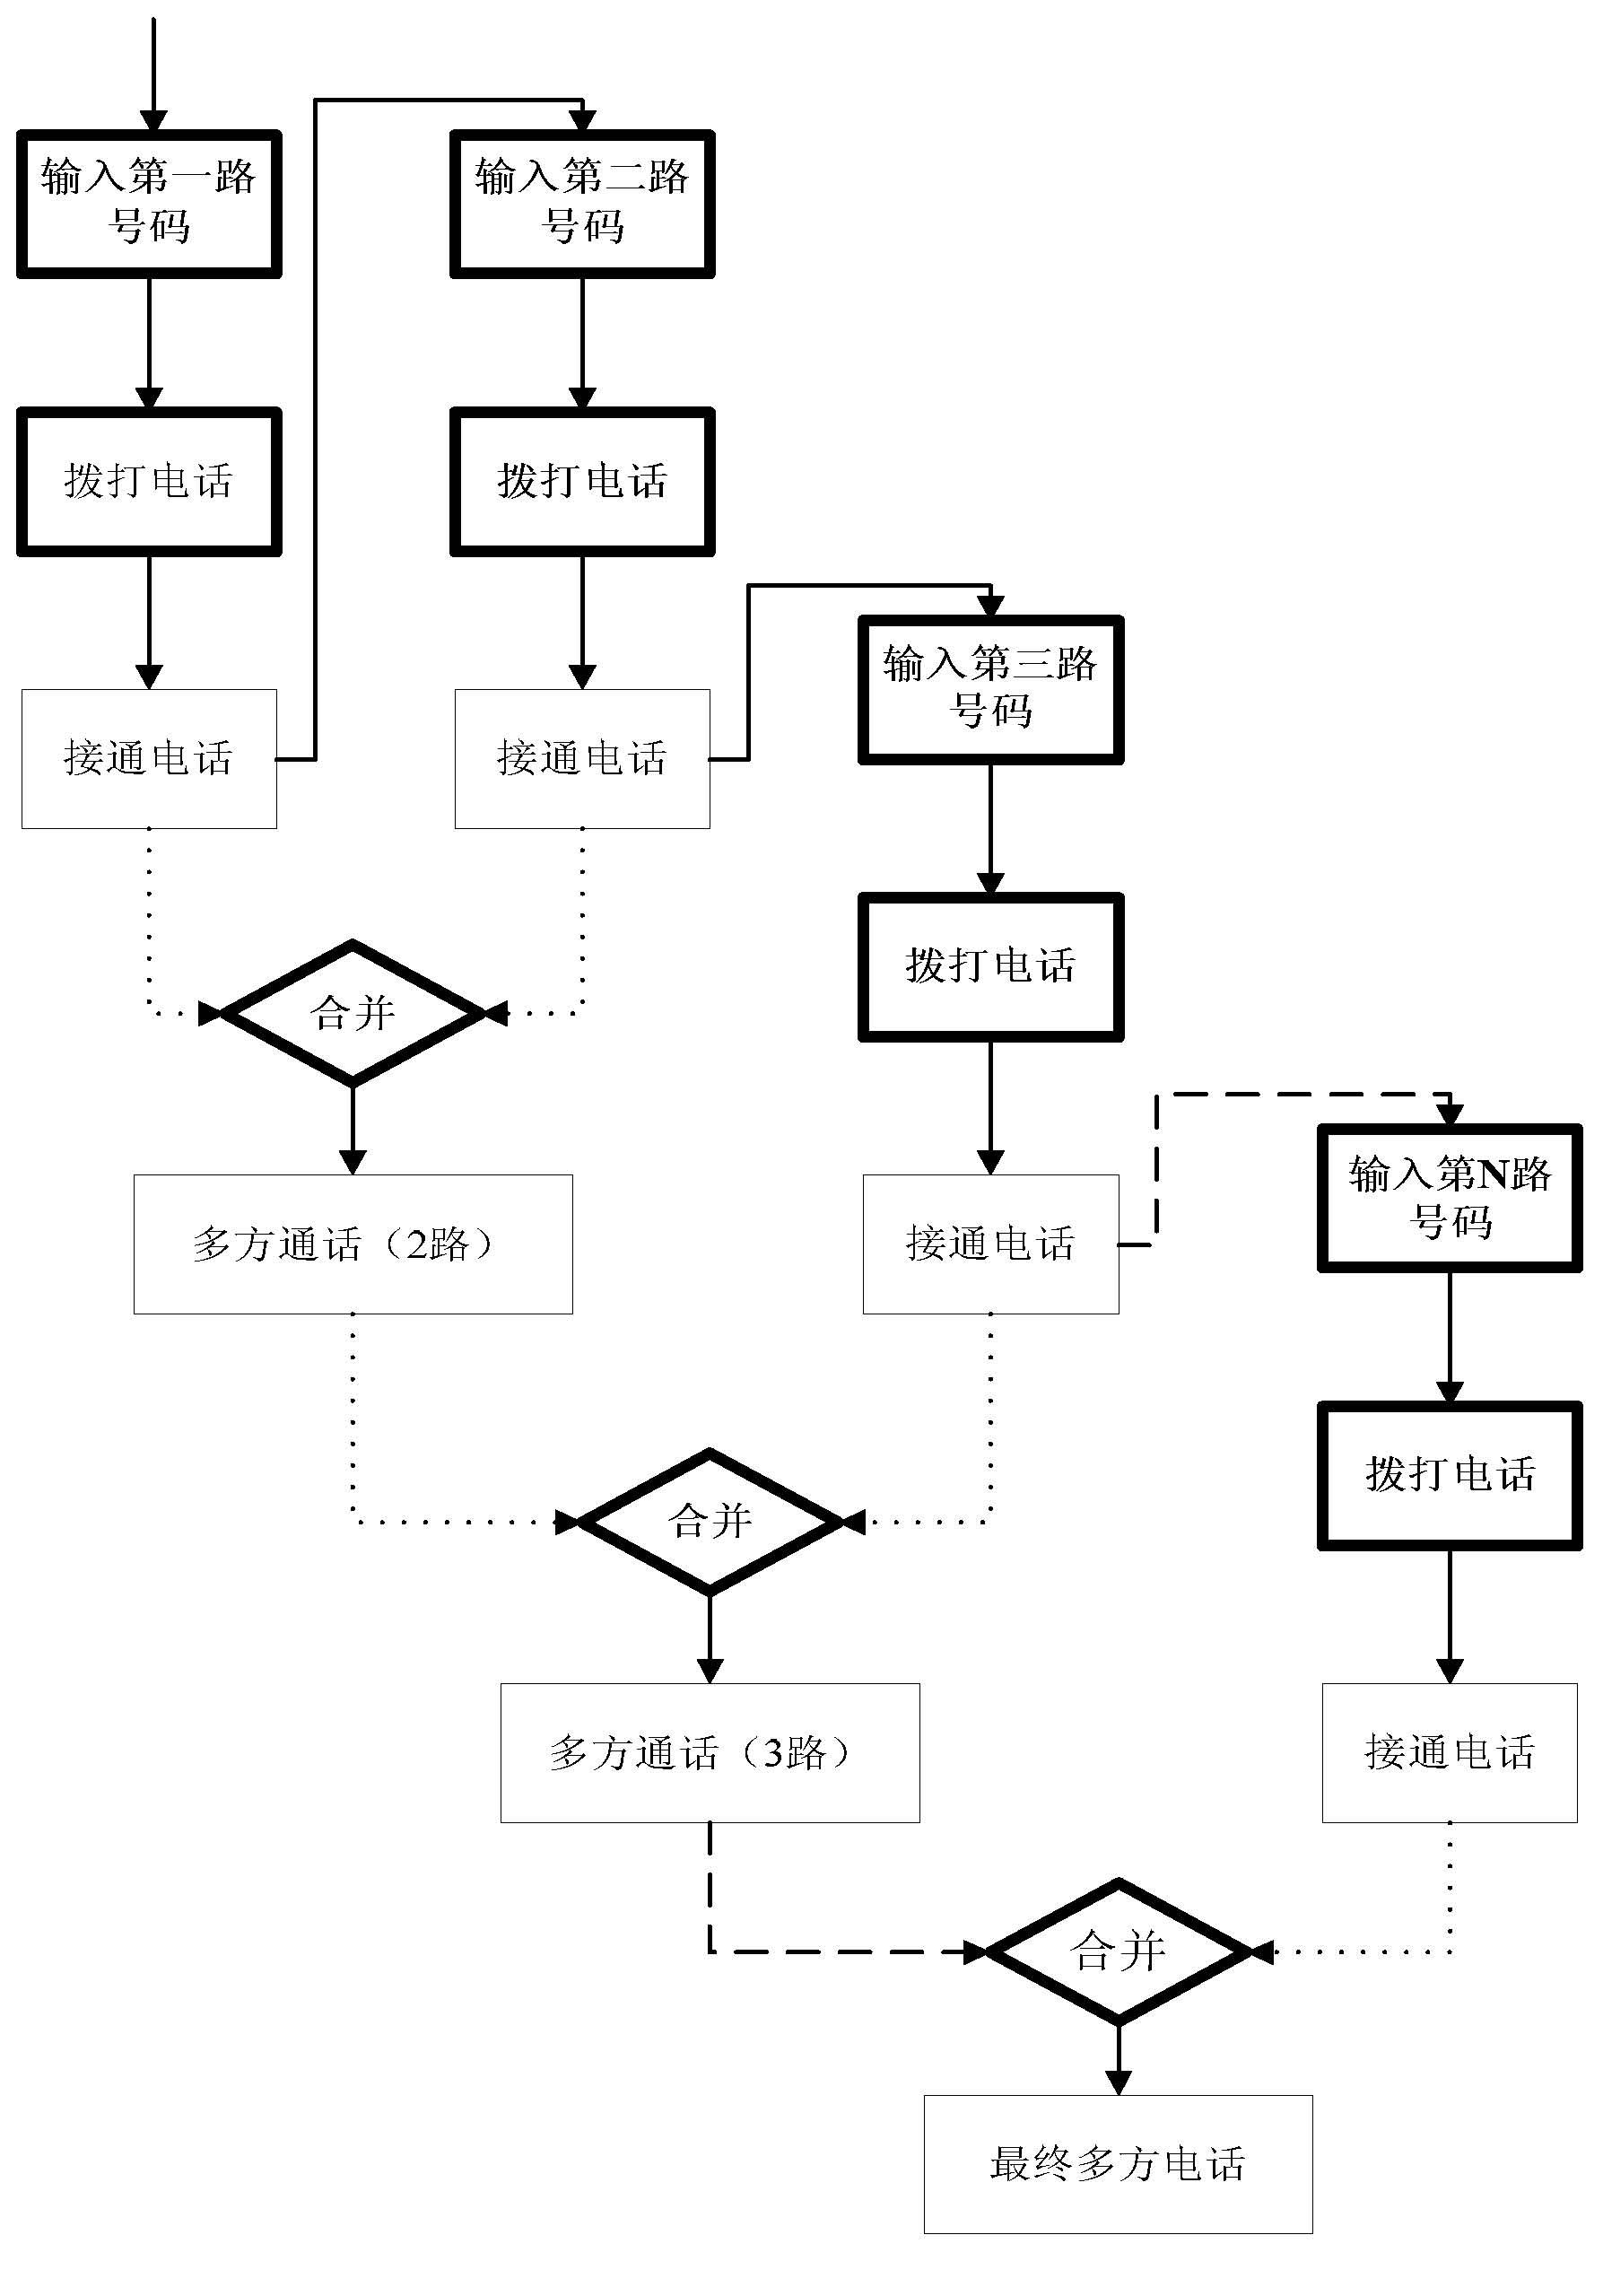 Multi-party call terminal control method